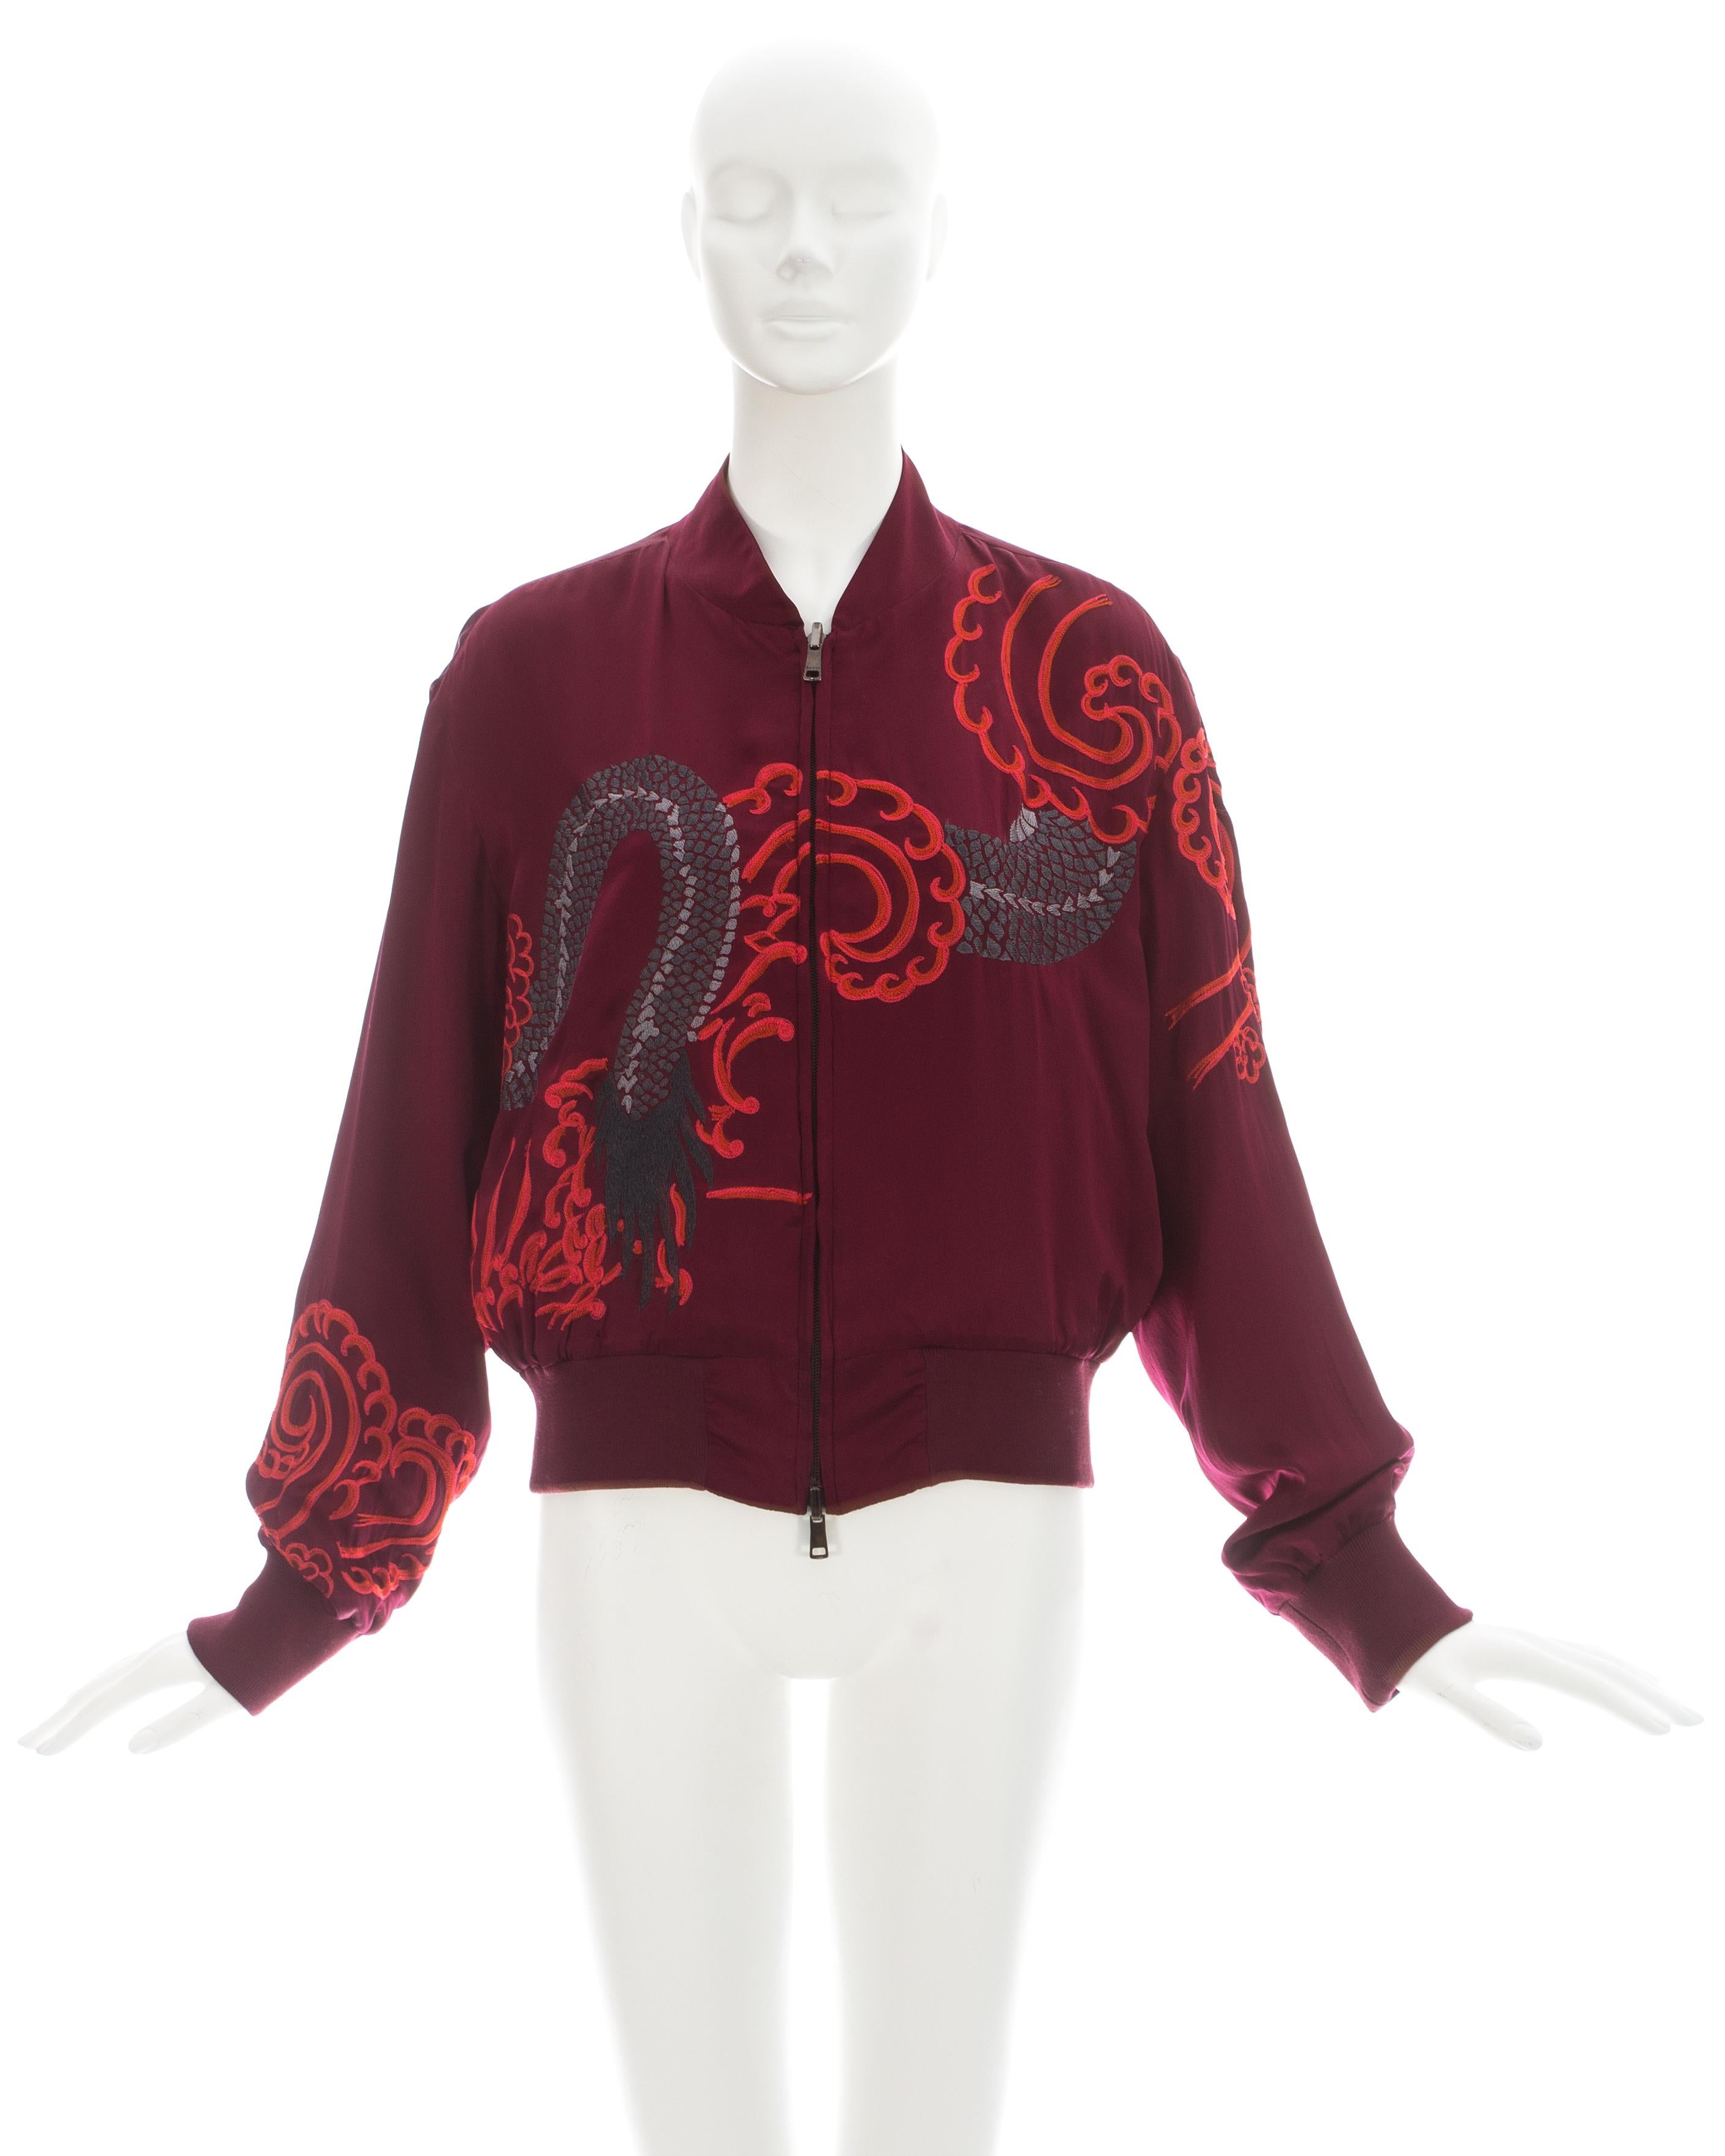 Gucci by Tom Ford; Red silk reversible bomber jacket; one side with dragon embroidery and the other plain.

Spring-Summer 2001